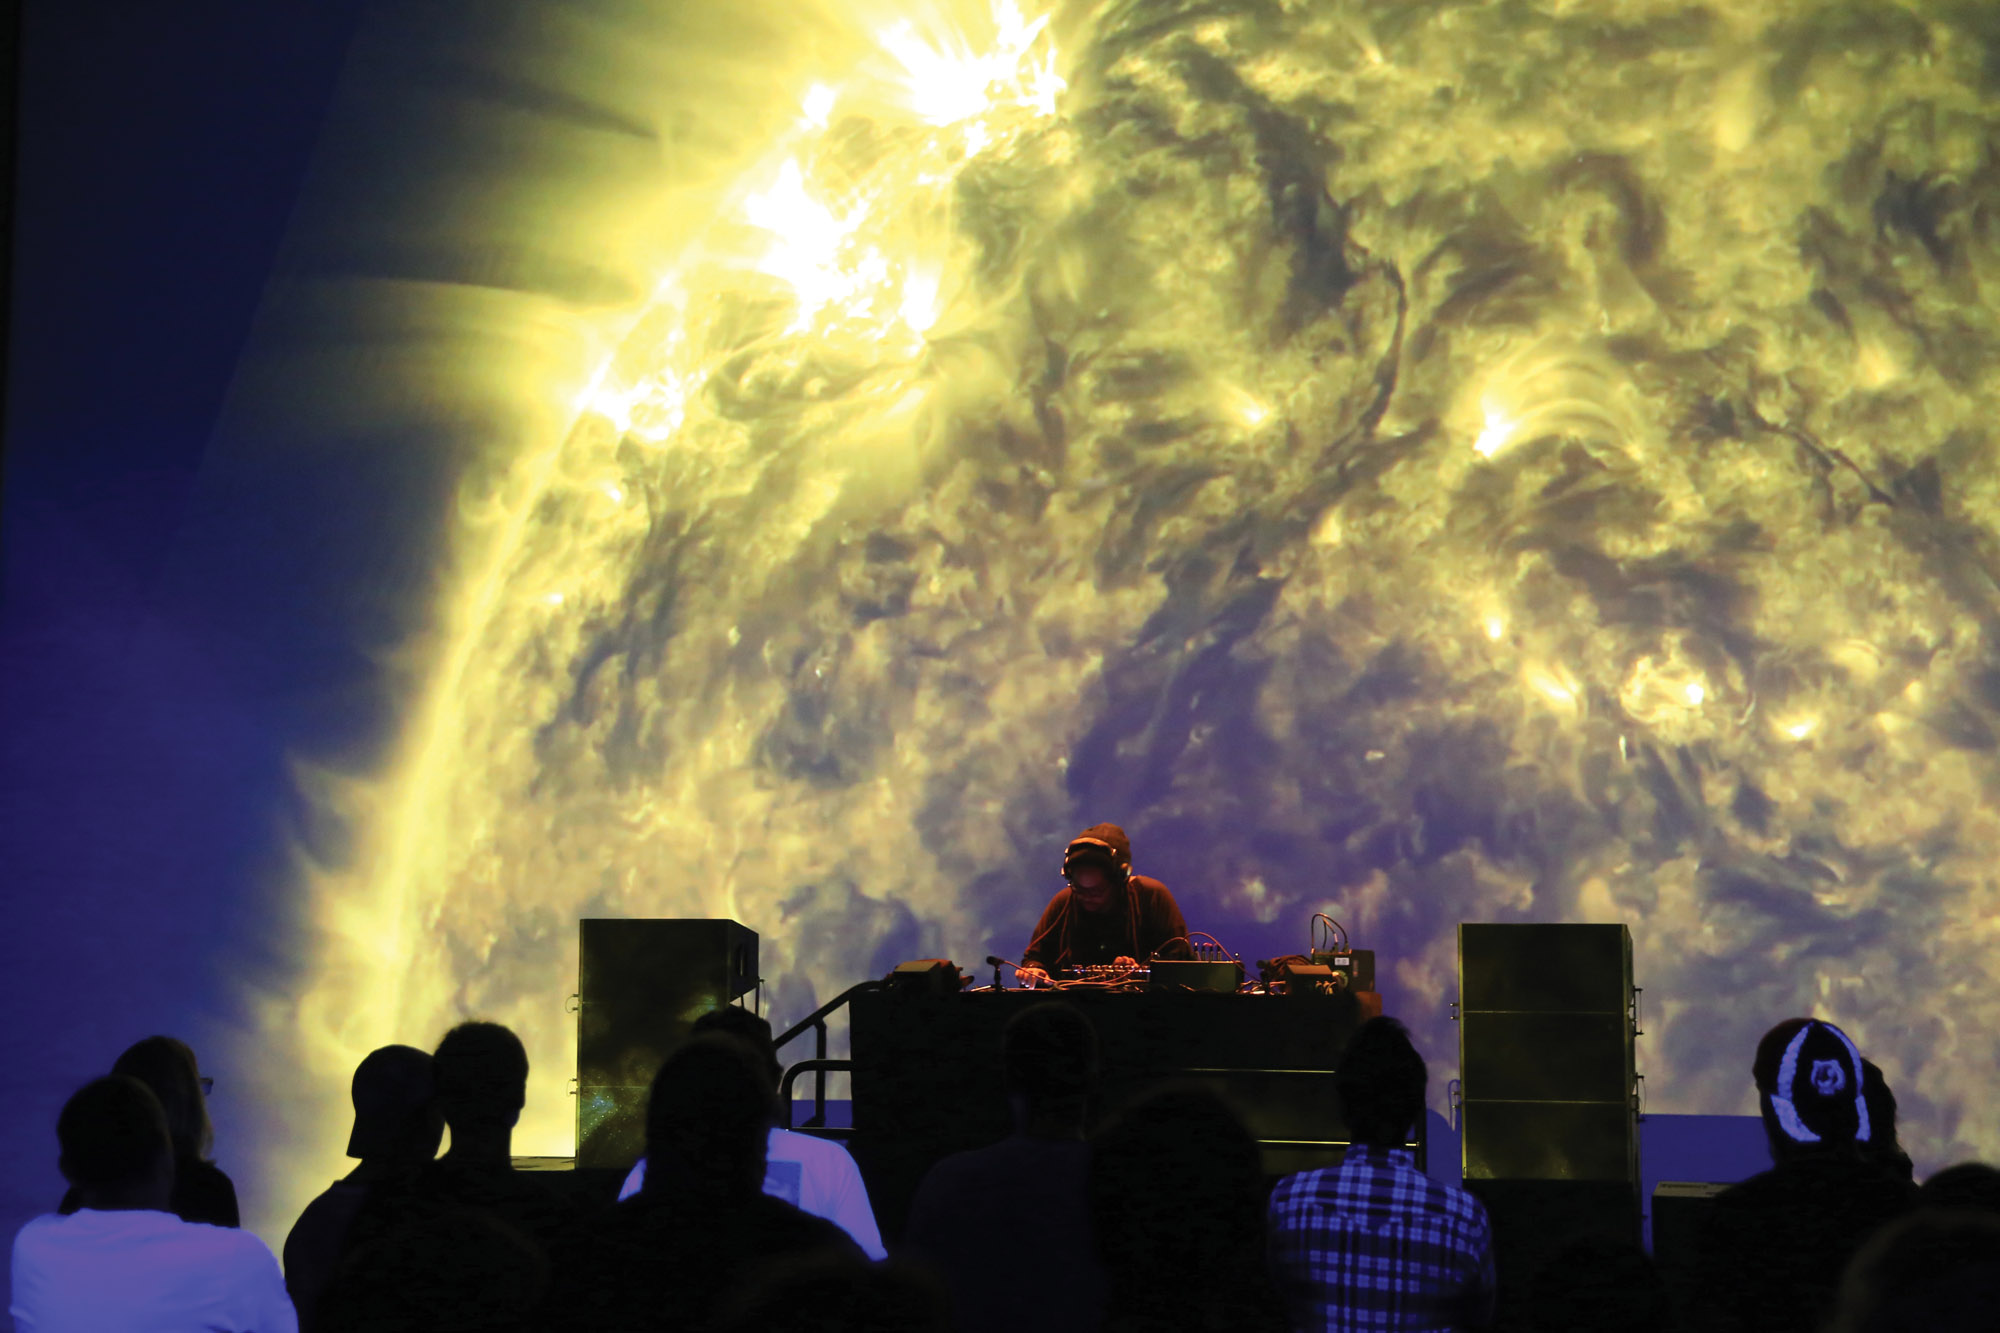 Heiroglyphic Being the artist Doing on stage to a small crowd as an image of the suns solar flares is projected behind him. 